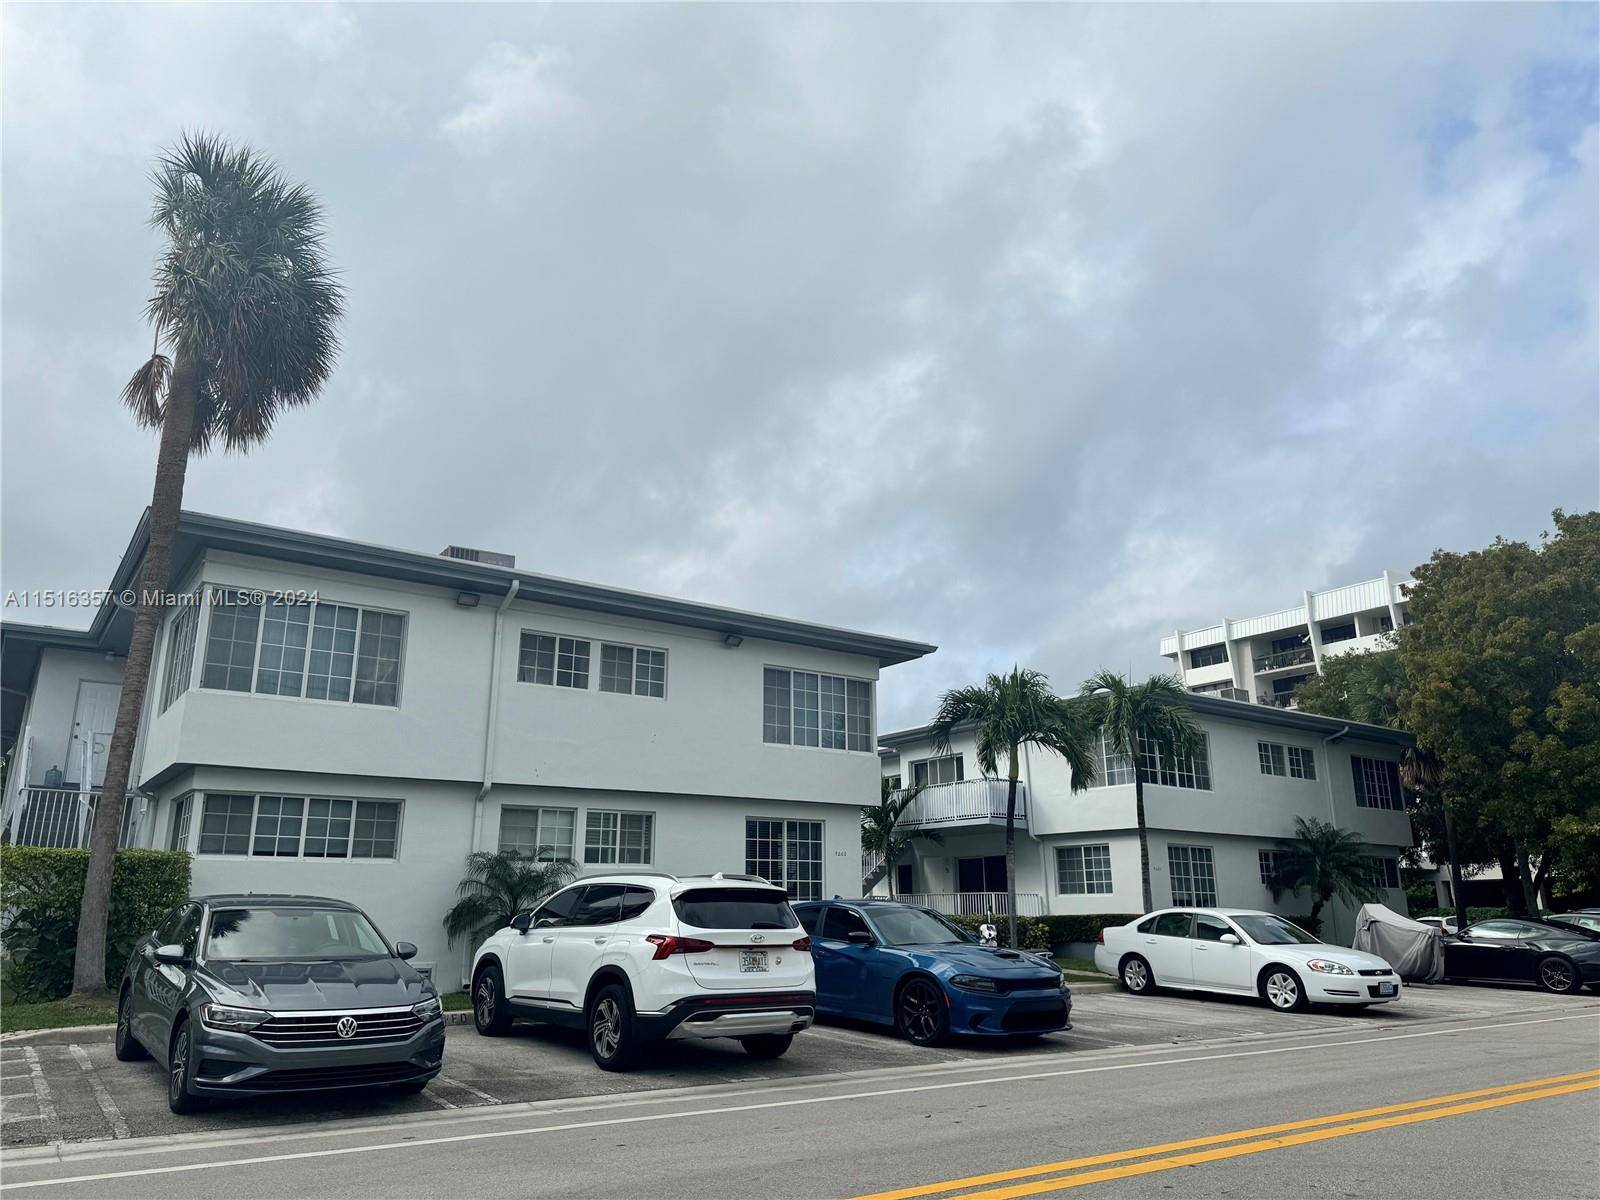 Discover the epitome of island living in this 2 2 gem nestled in a boutique MIMO building in coveted Bay Harbor Islands.